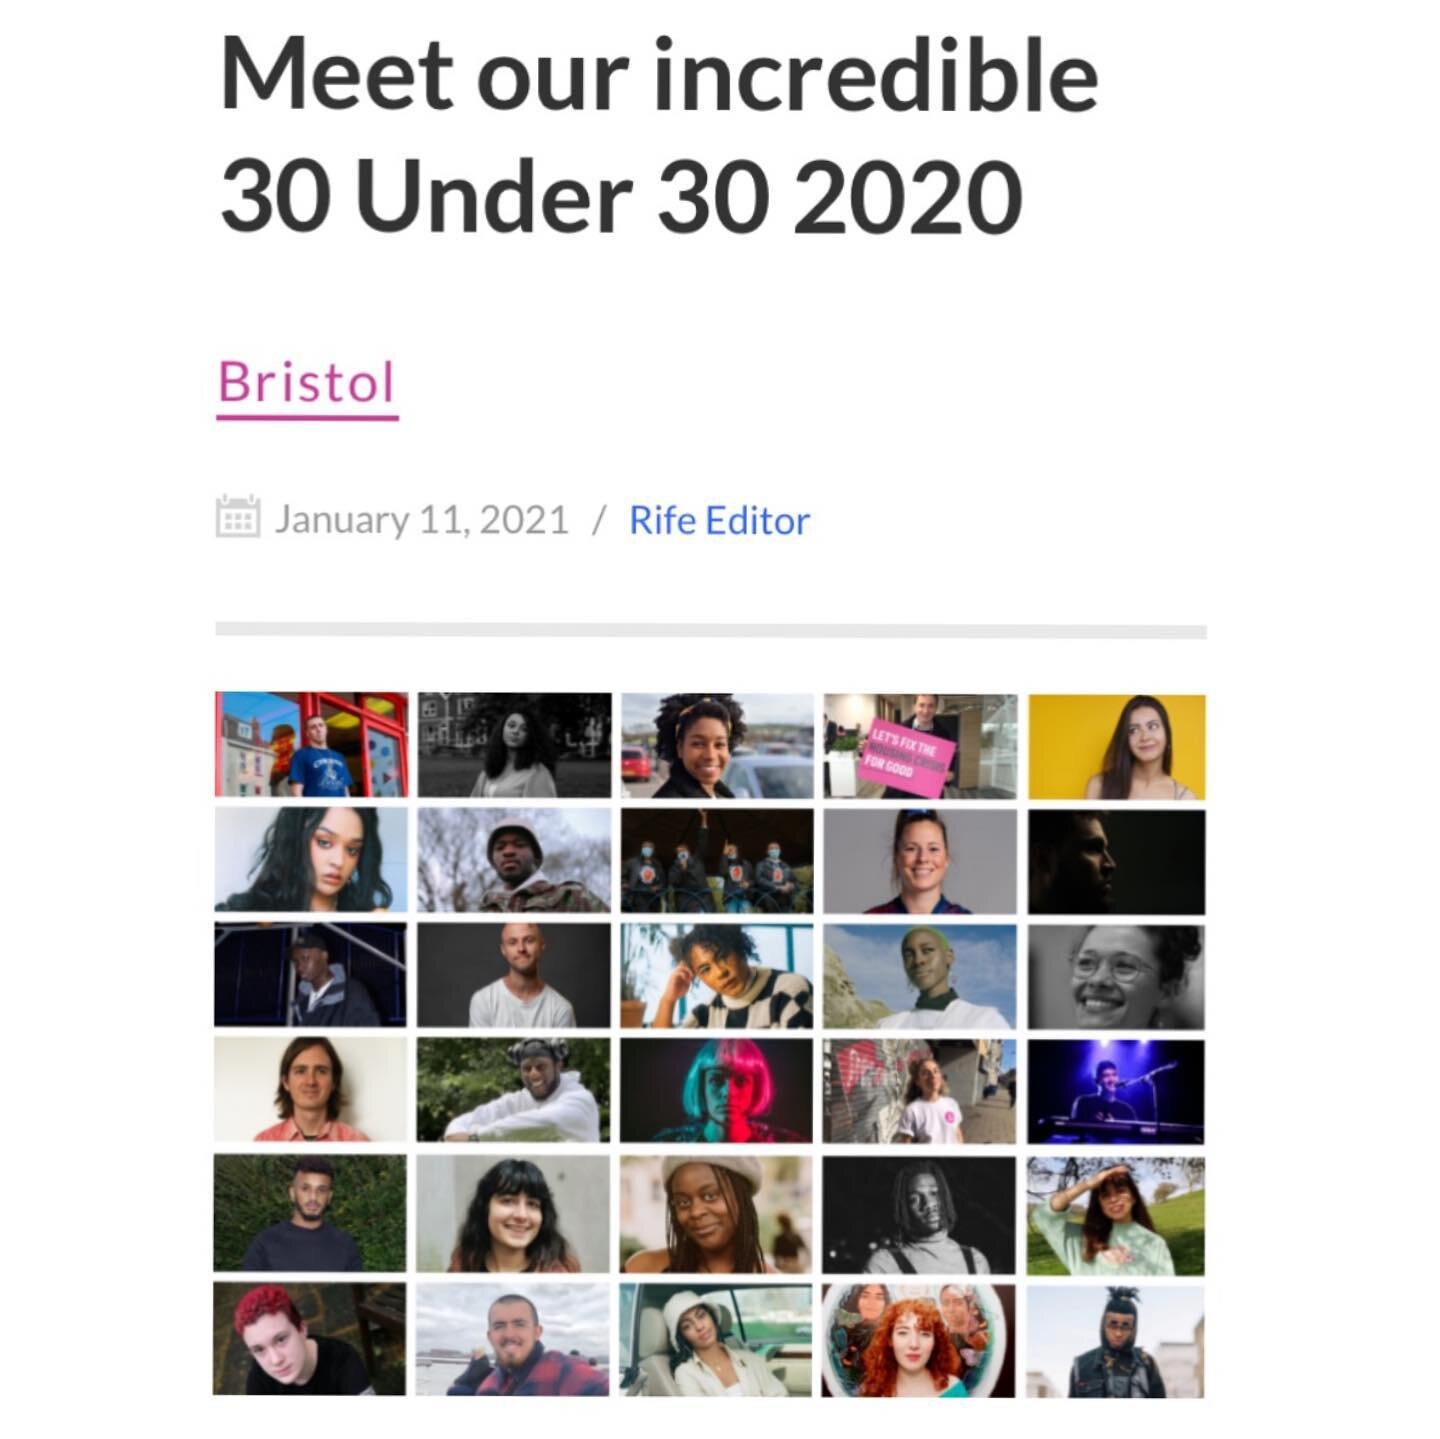 🥰 Very excited and humbled to be included in this years @rifemag 30 under 30 list alongside some amazing people ⭐️:

@lewiswedlock
@hortonhearsahuw
@travisalabanza
@antonia__may
@___qezz___
@lucyjturner
@ze.zima
@blacksugarising
@brooktate
@_momin14